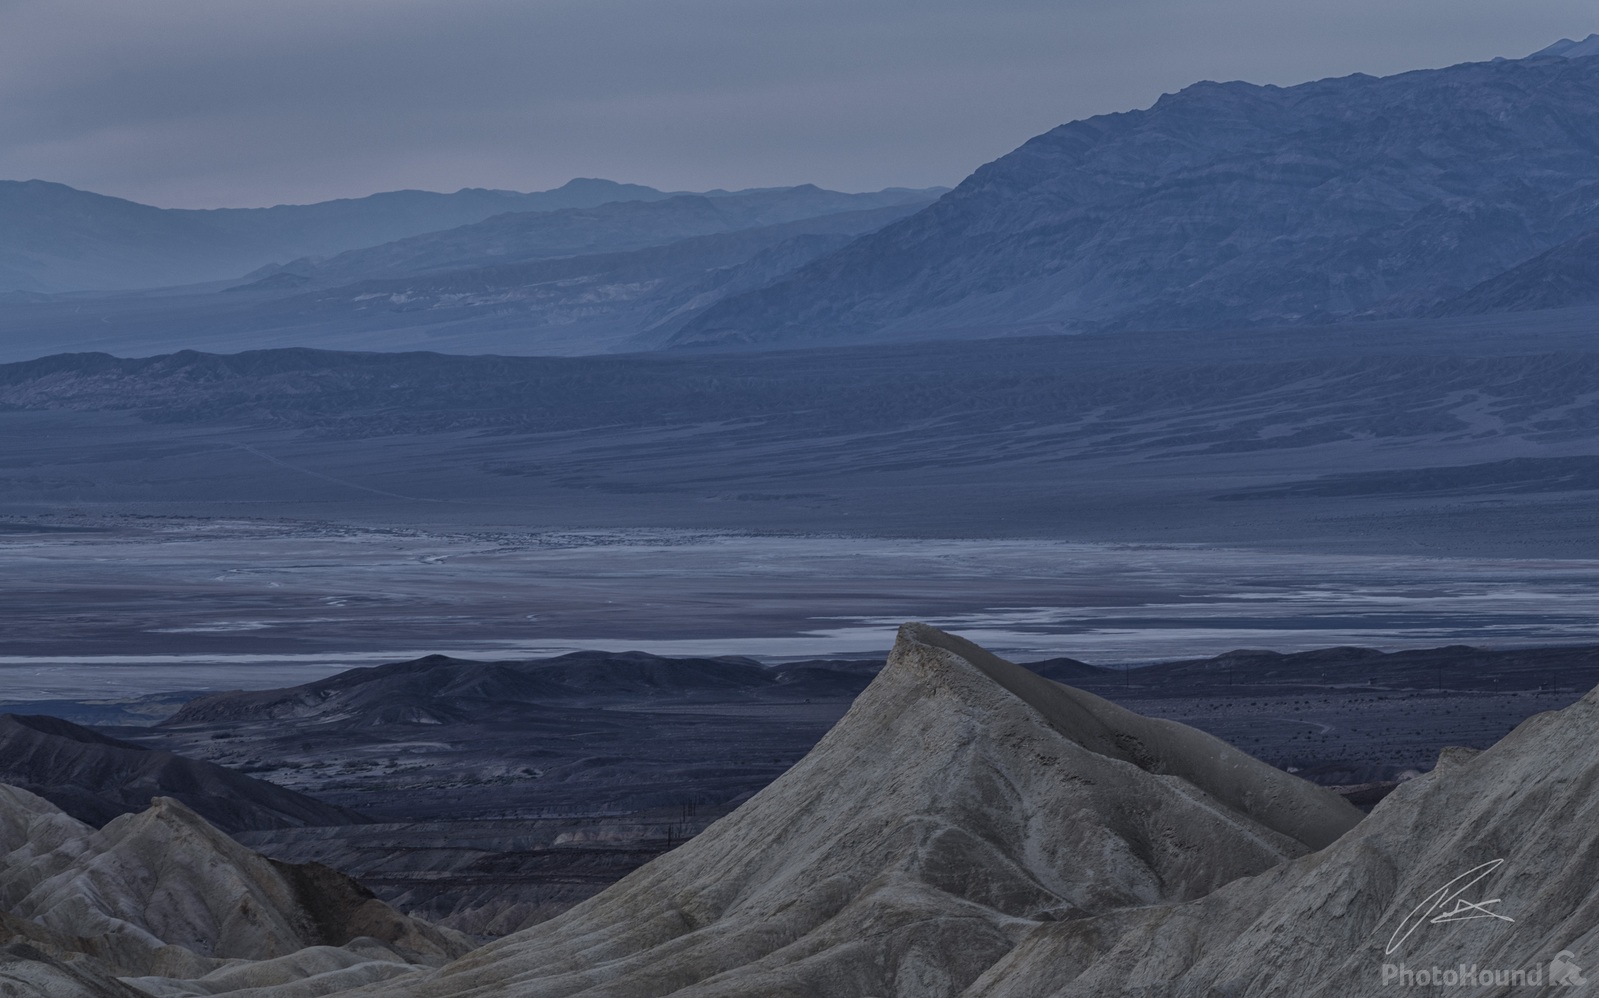 Image of Furnace Creek, Death Valley NP by Patrick Hulley